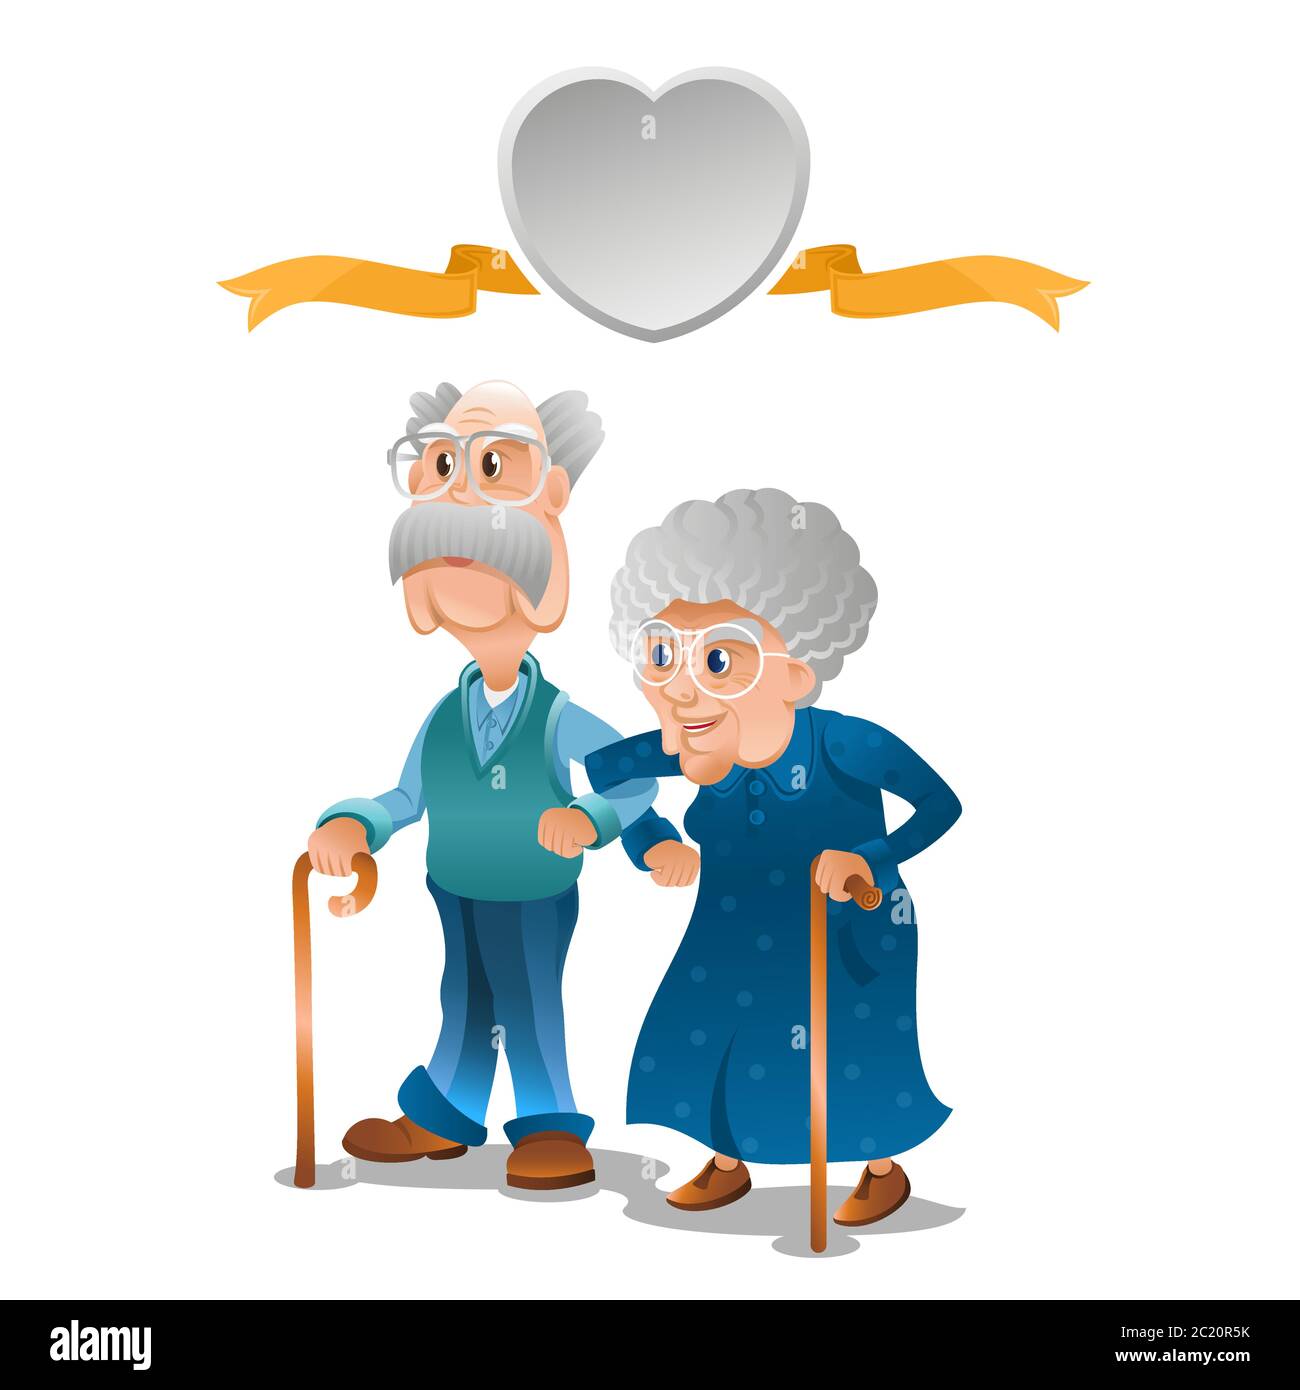 Old grandma and grandpa stand together arm in arm. Couple with big